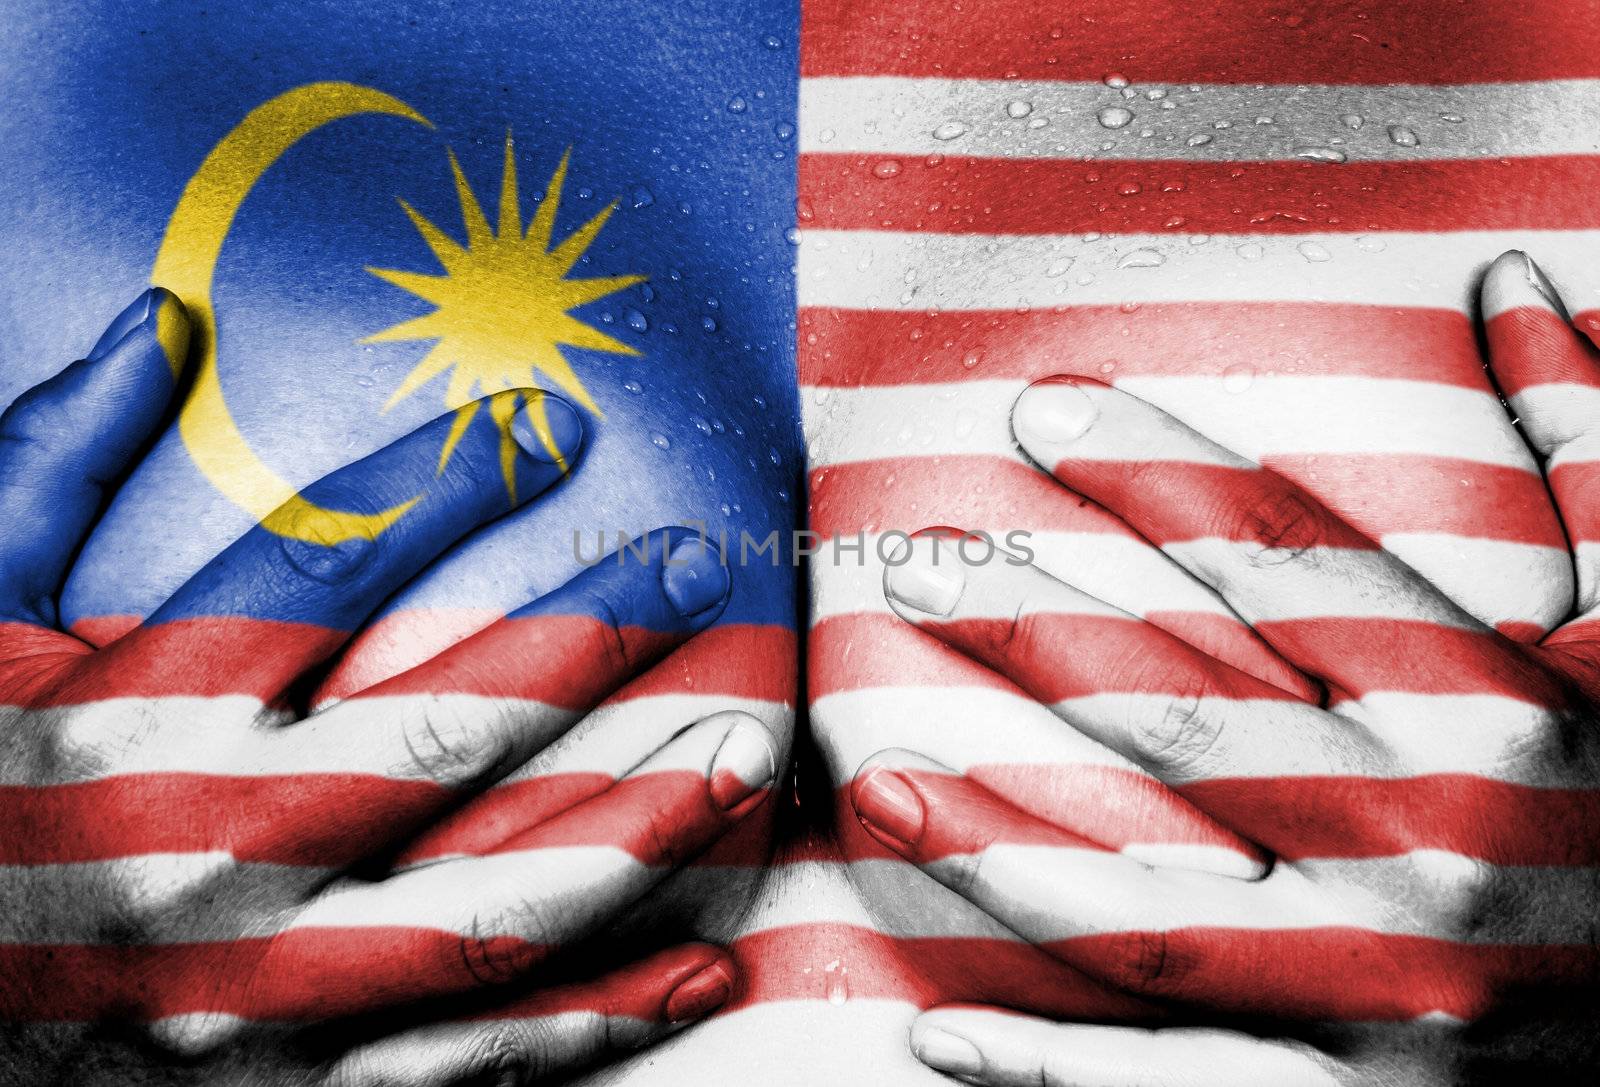 Sweaty upper part of female body, hands covering breasts, flag of Malaysia